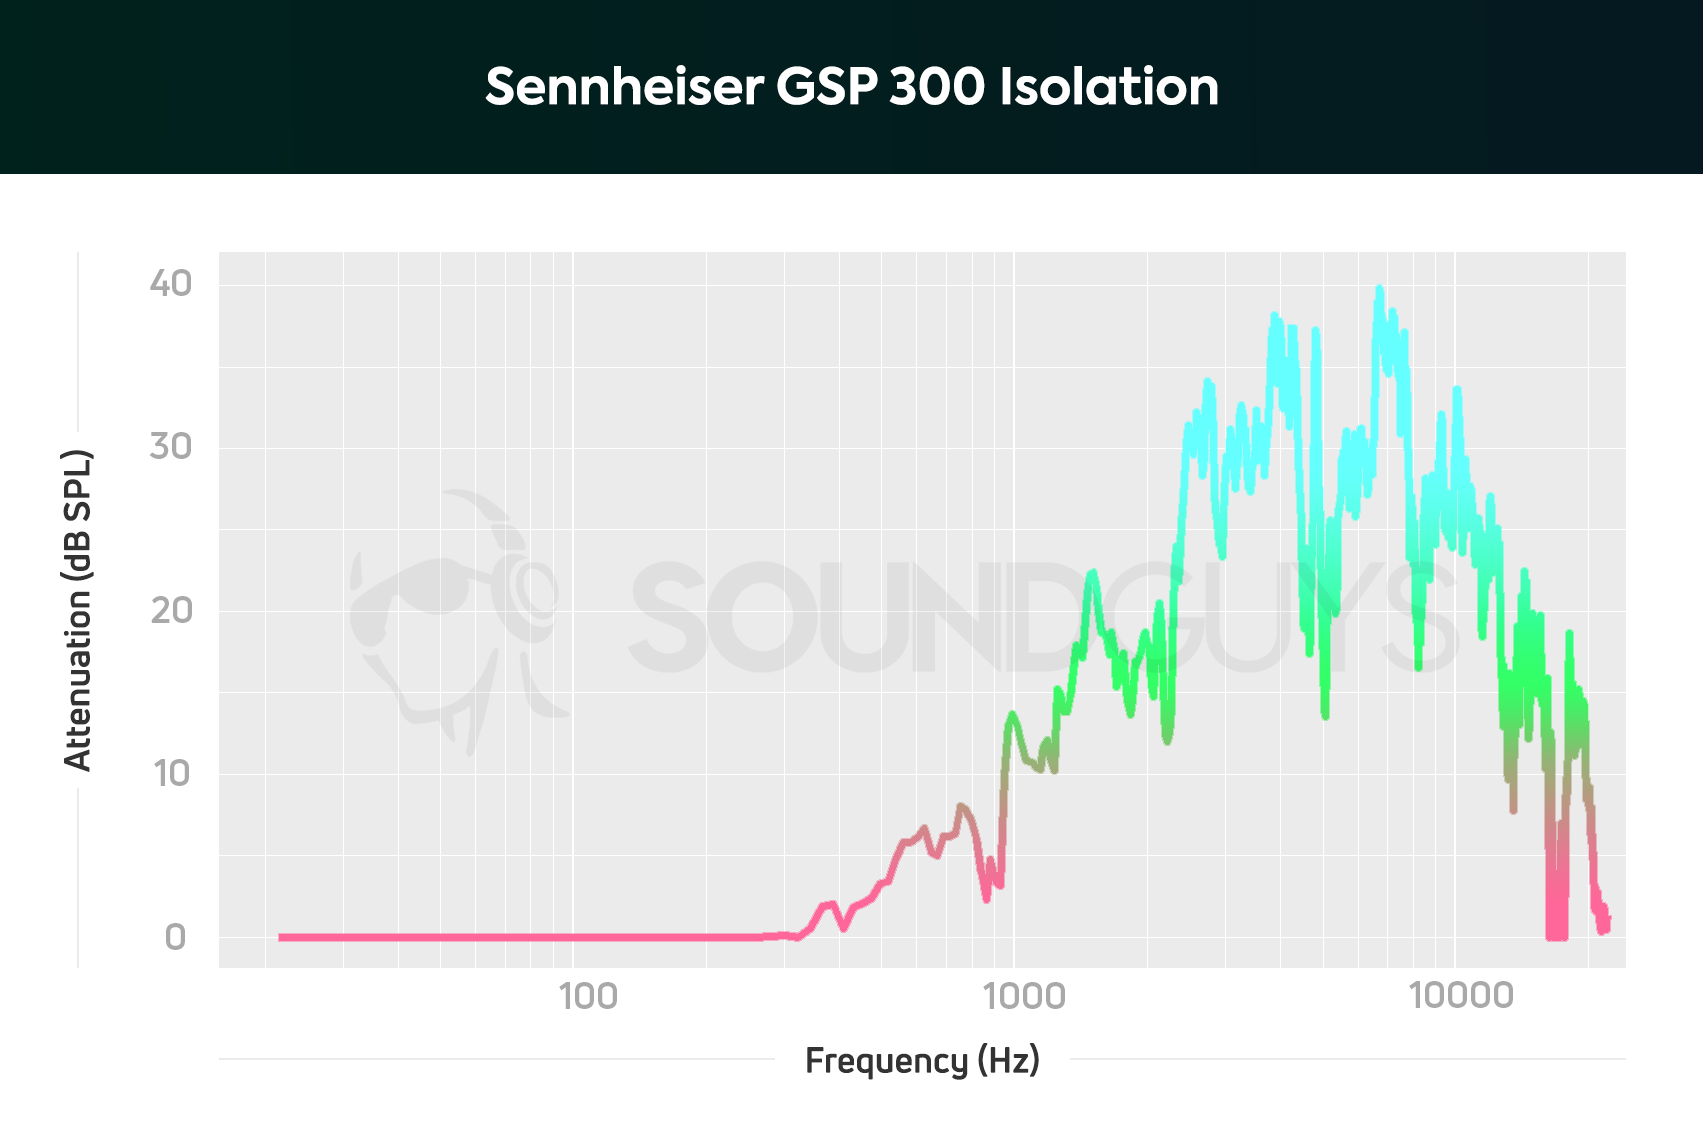 An isolation chart for The Sennheiser GSP 300 gaming headset, which shows pretty average isolation for a gaming headset